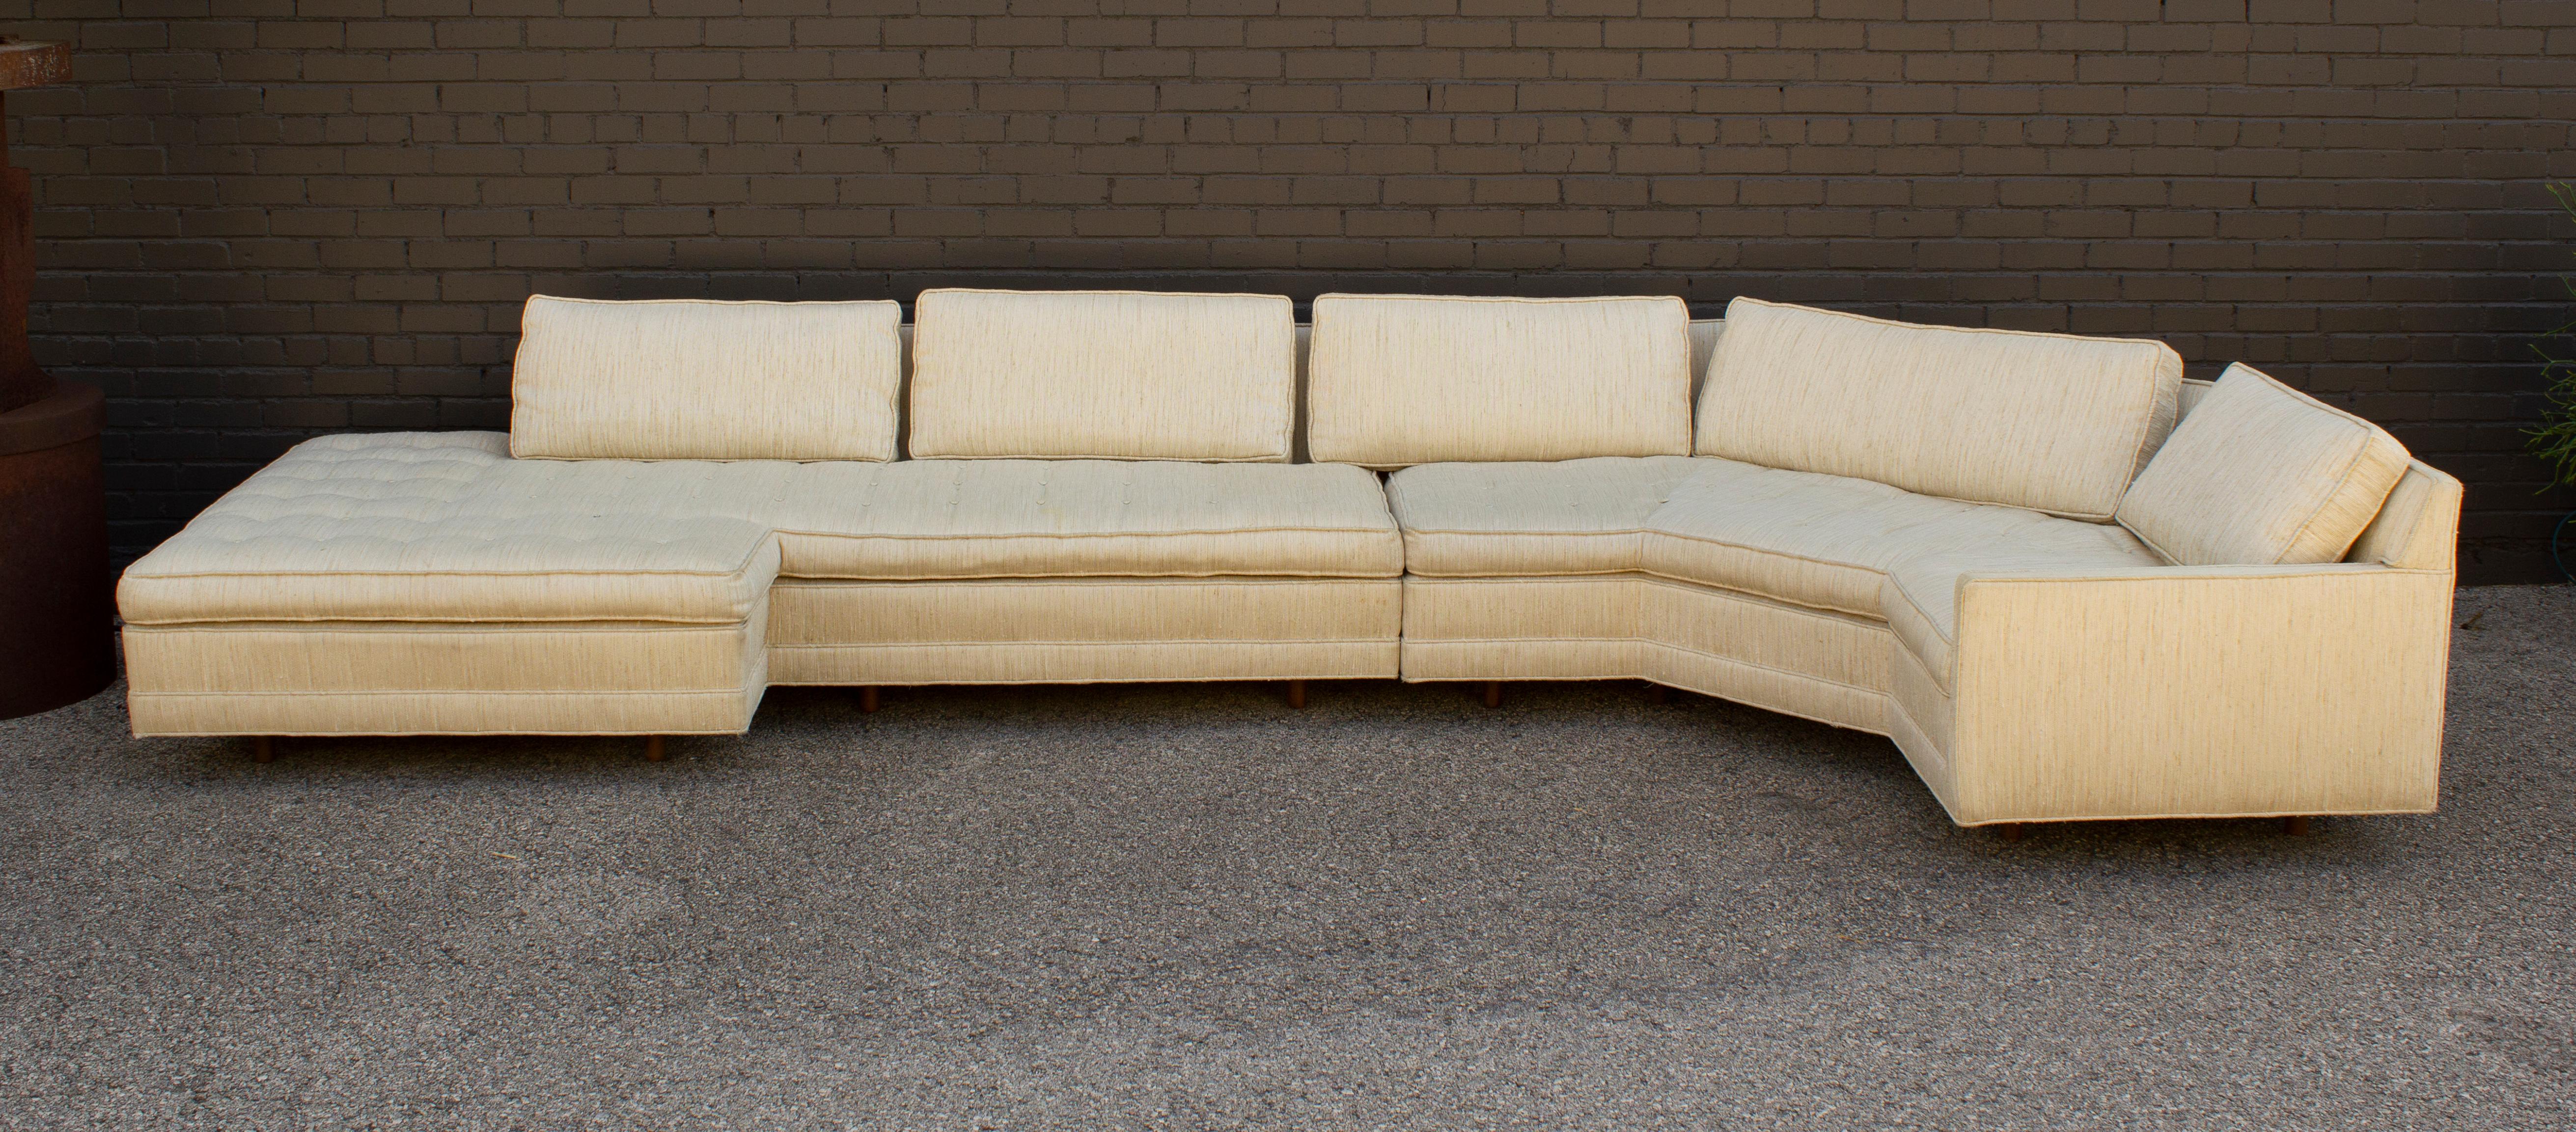 Two-piece sectional sofa designed by Harvey Probber from his Nuclear Sert Group. The sofa is in good original condition and can be used together or separately. It is still in the original period fabric and would certainly benefit from re-upholstery.